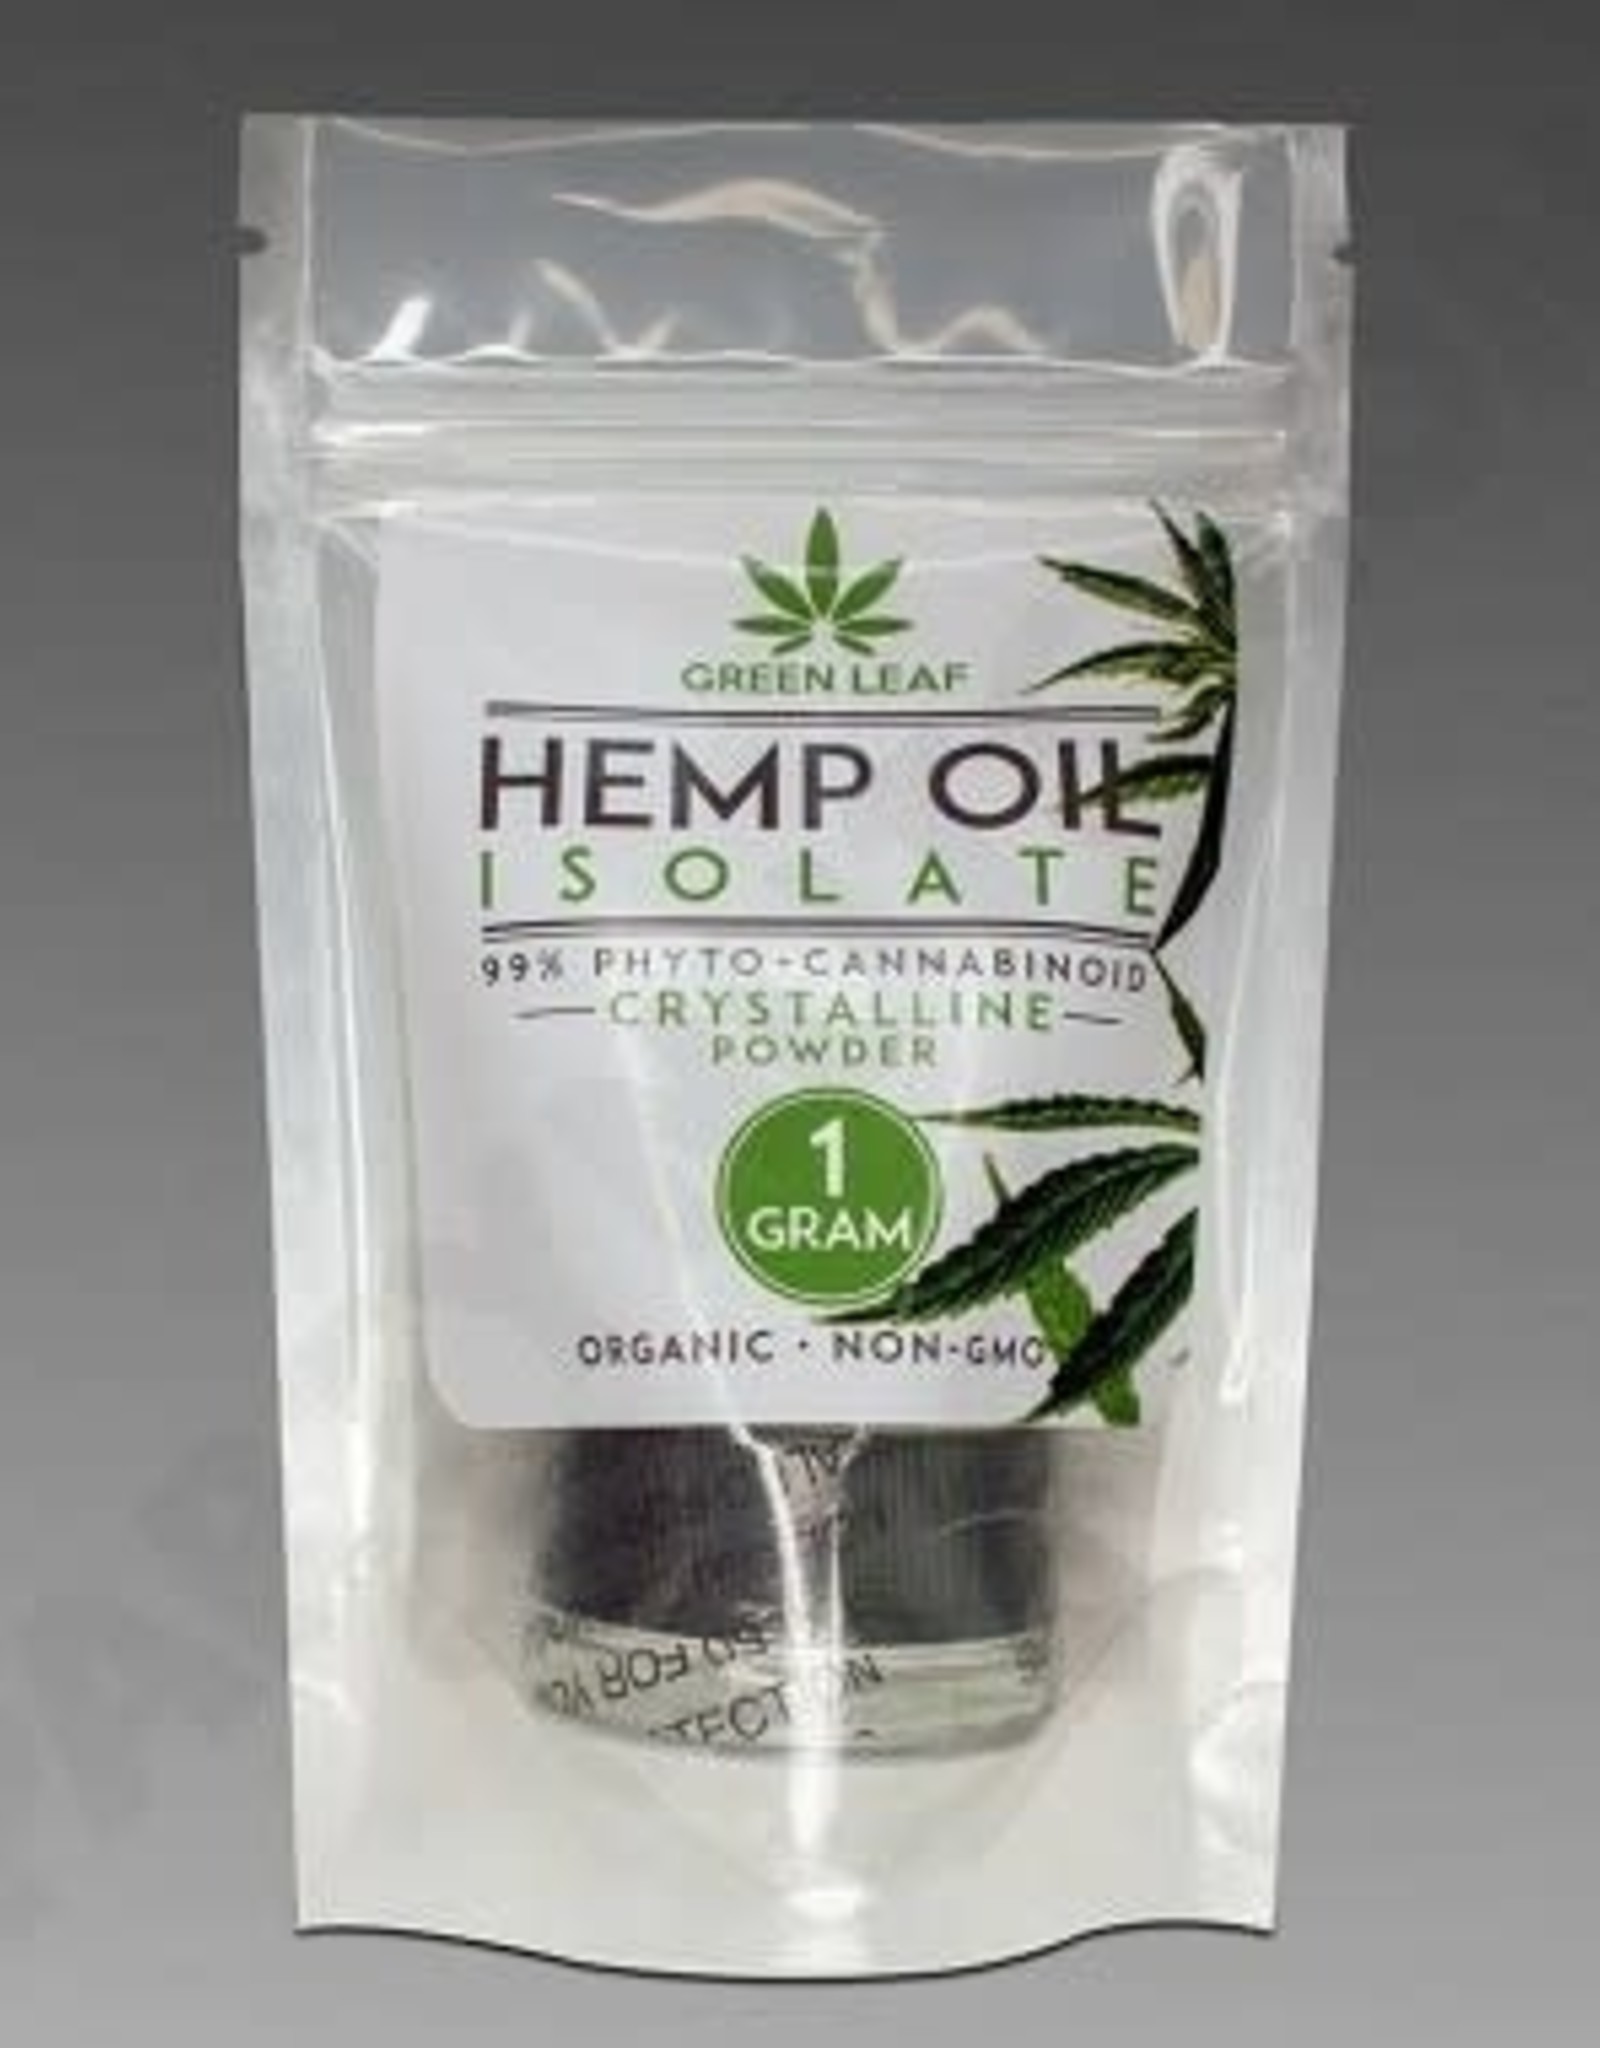 Green Leaf Hemp Extract Oil Isolate Crystalline 1000mg 1gm by Green Leaf